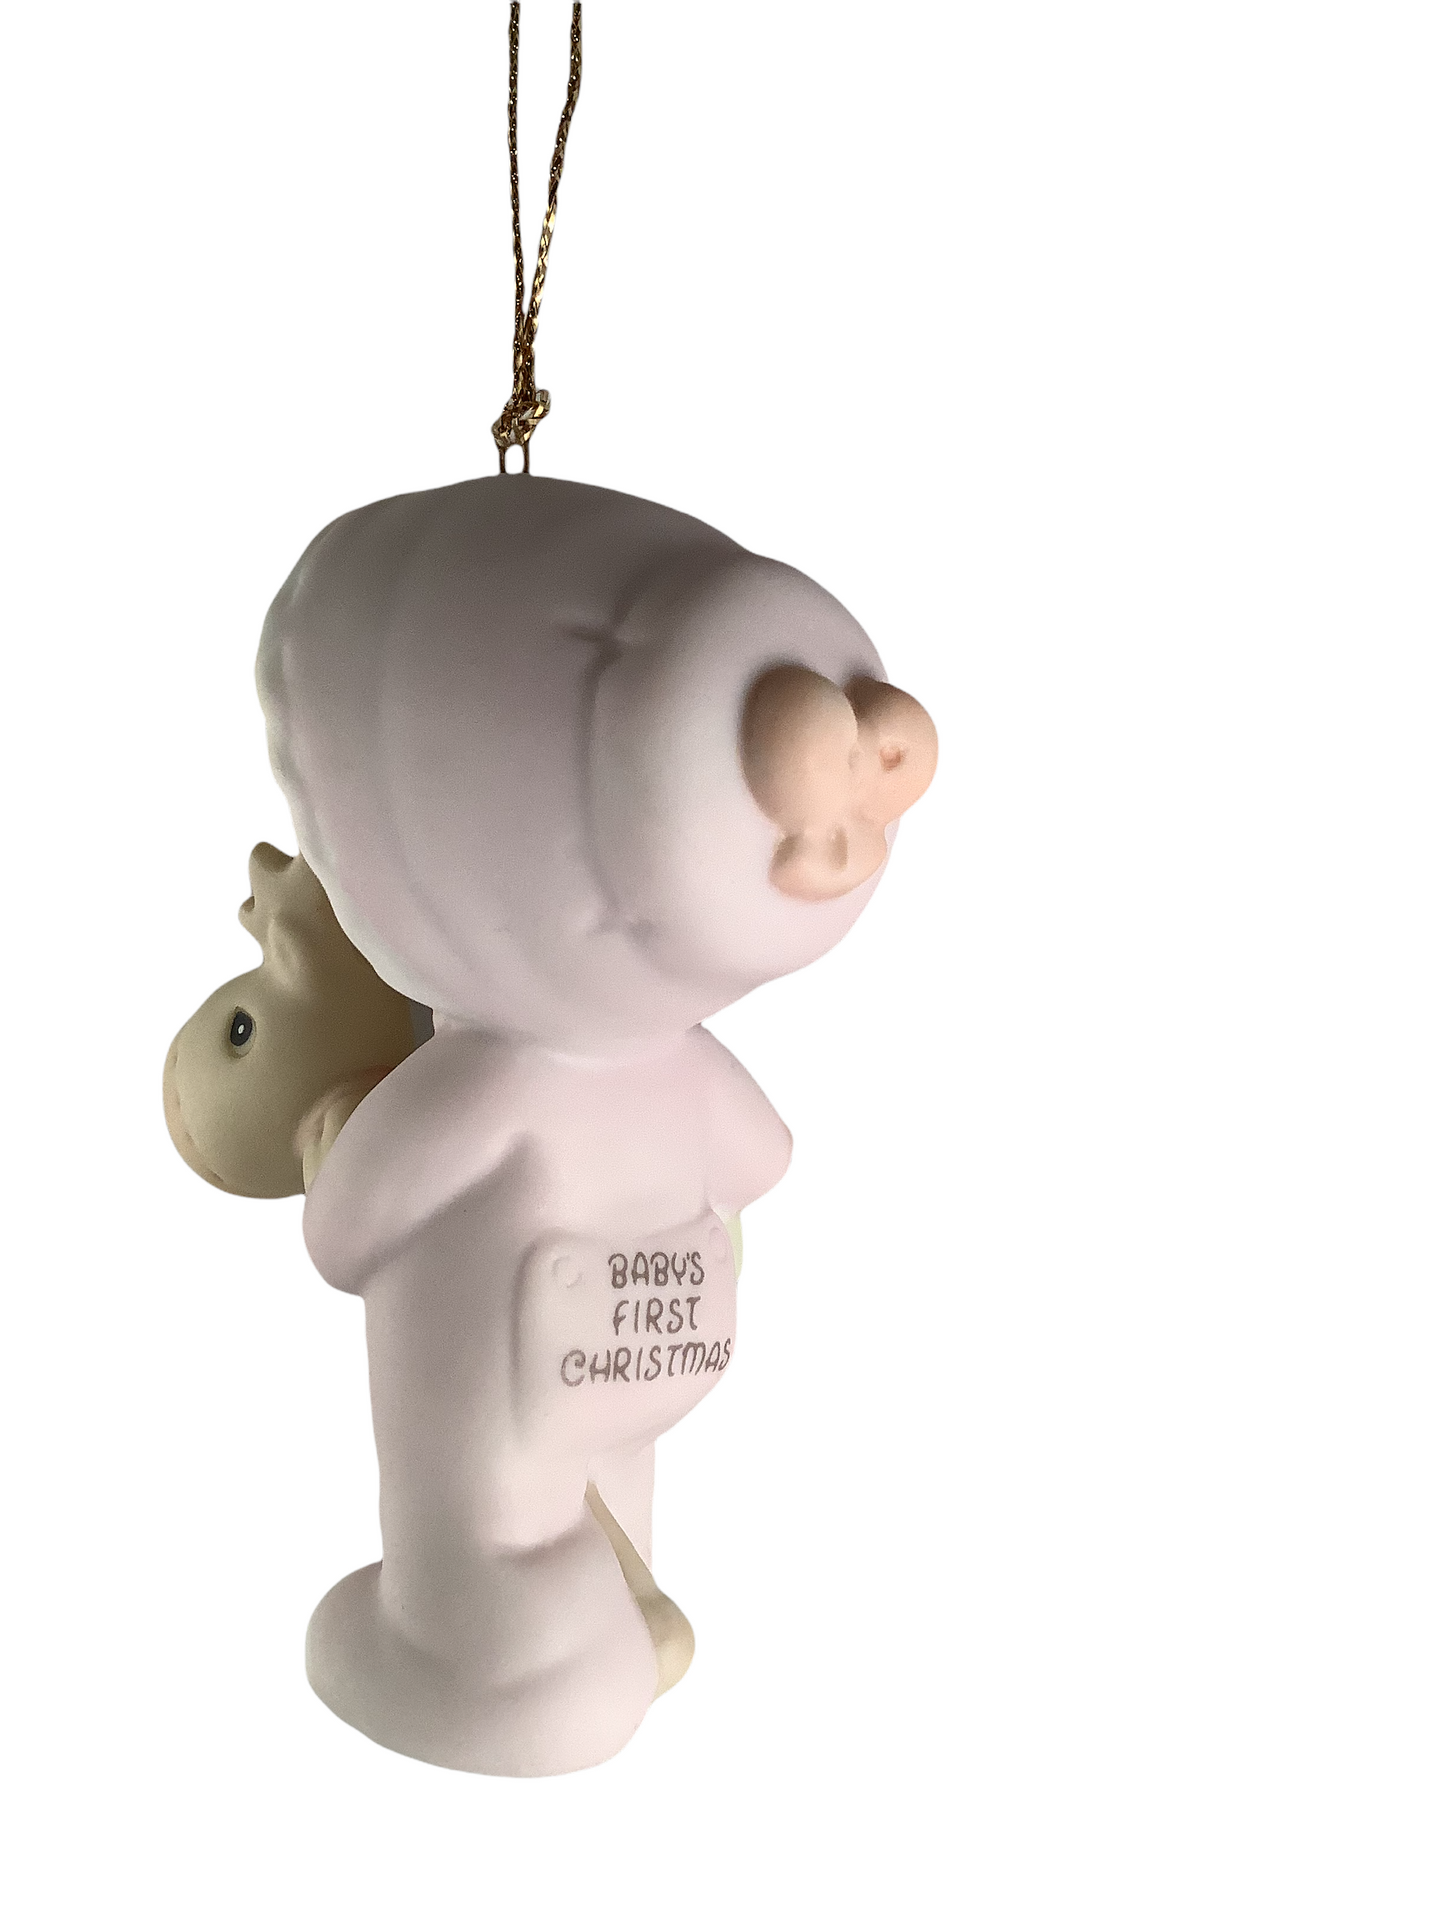 Baby's First Christmas 1994 (Girl) - Precious Moment Ornament